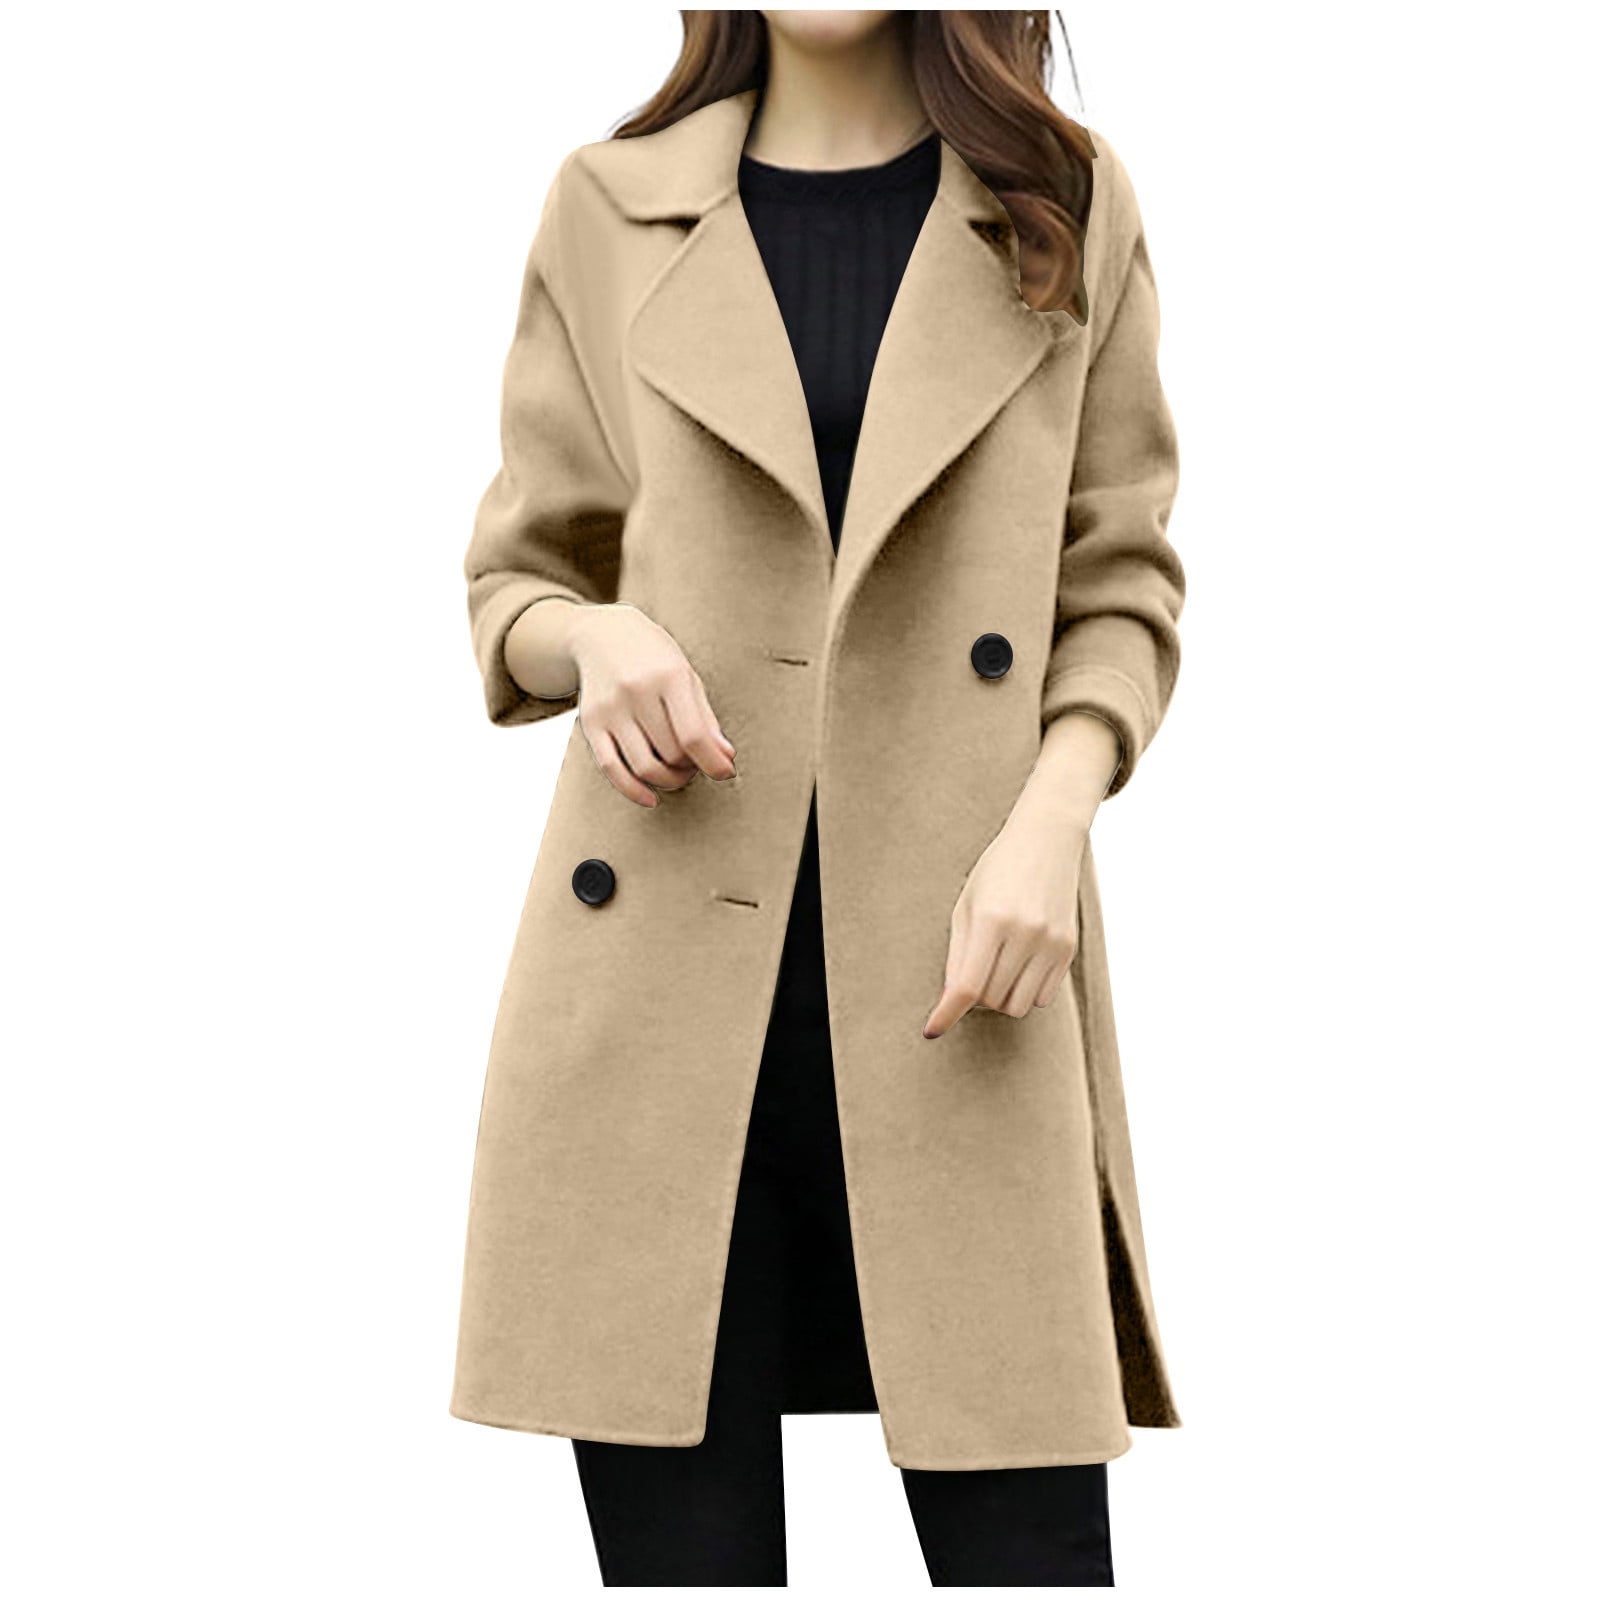 YOTAMI Womens Winter Wool Blend Coats Long Sleeve Solid Color  Double-Breasted Lapel Casual Mid-Long Jacket Outwear with Pockets